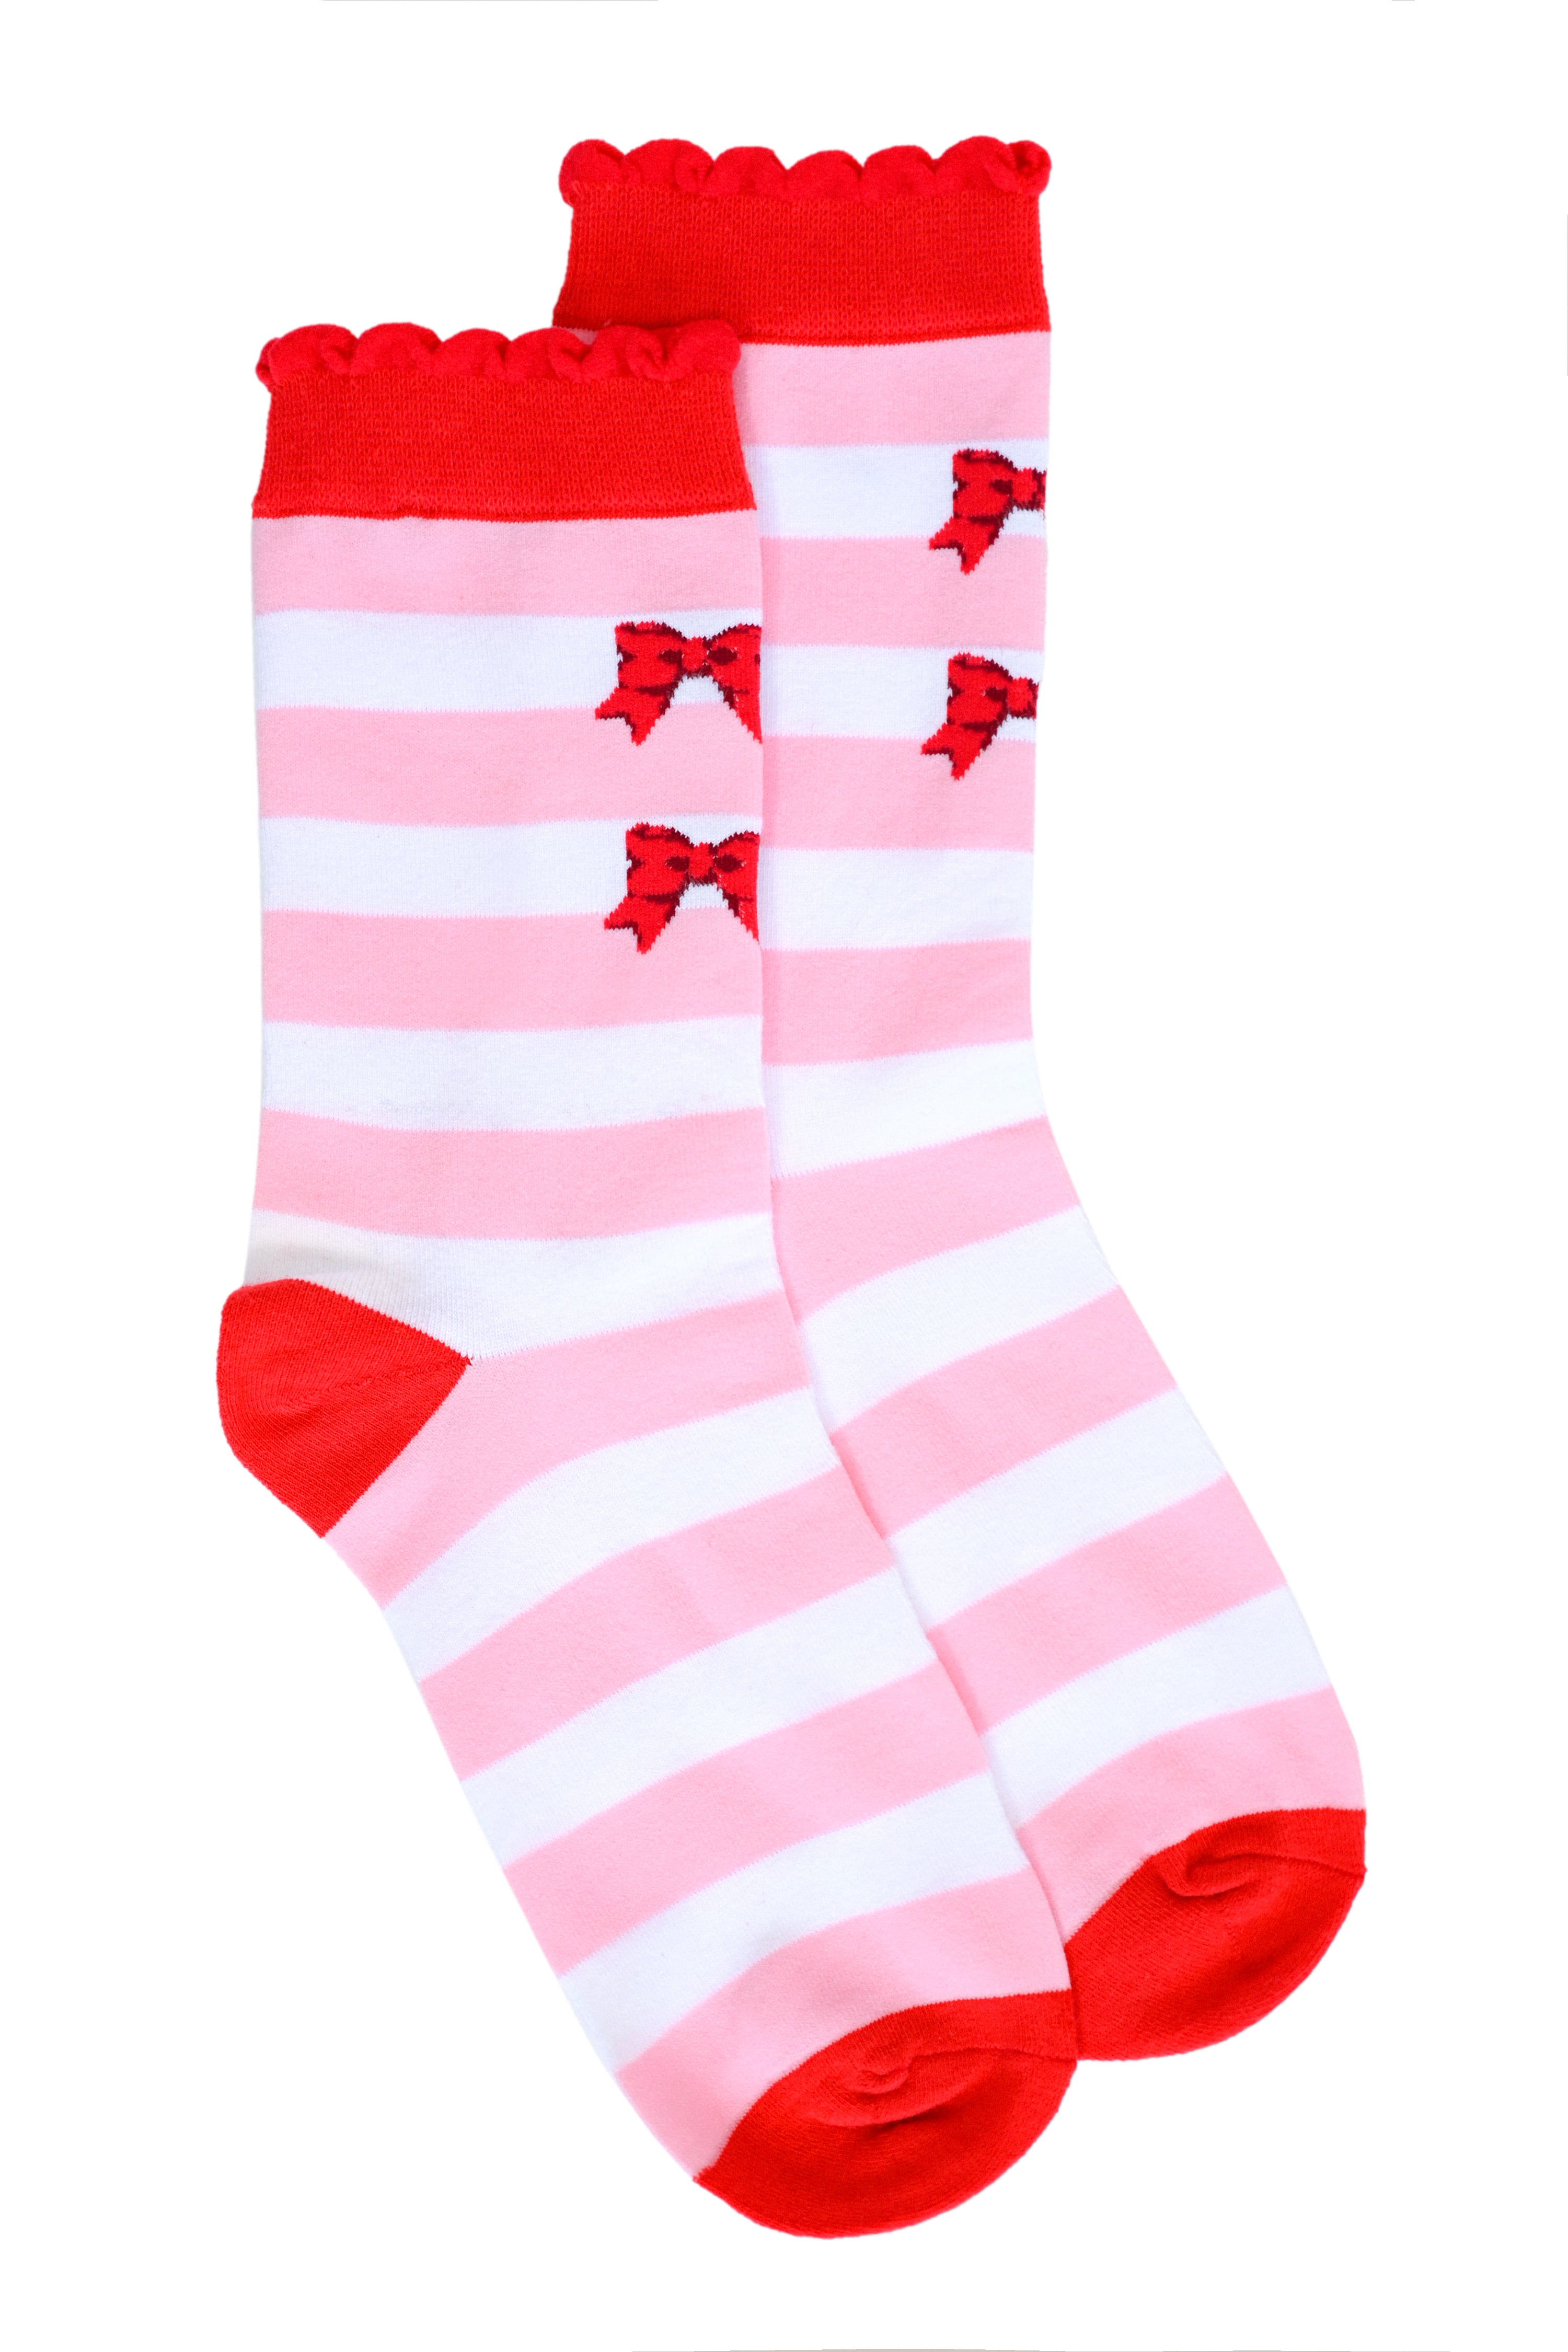 Pastel pink and white horizontal striped socks with red ruffle/cuff, toe, and heel. Red bows on the front of the sock.